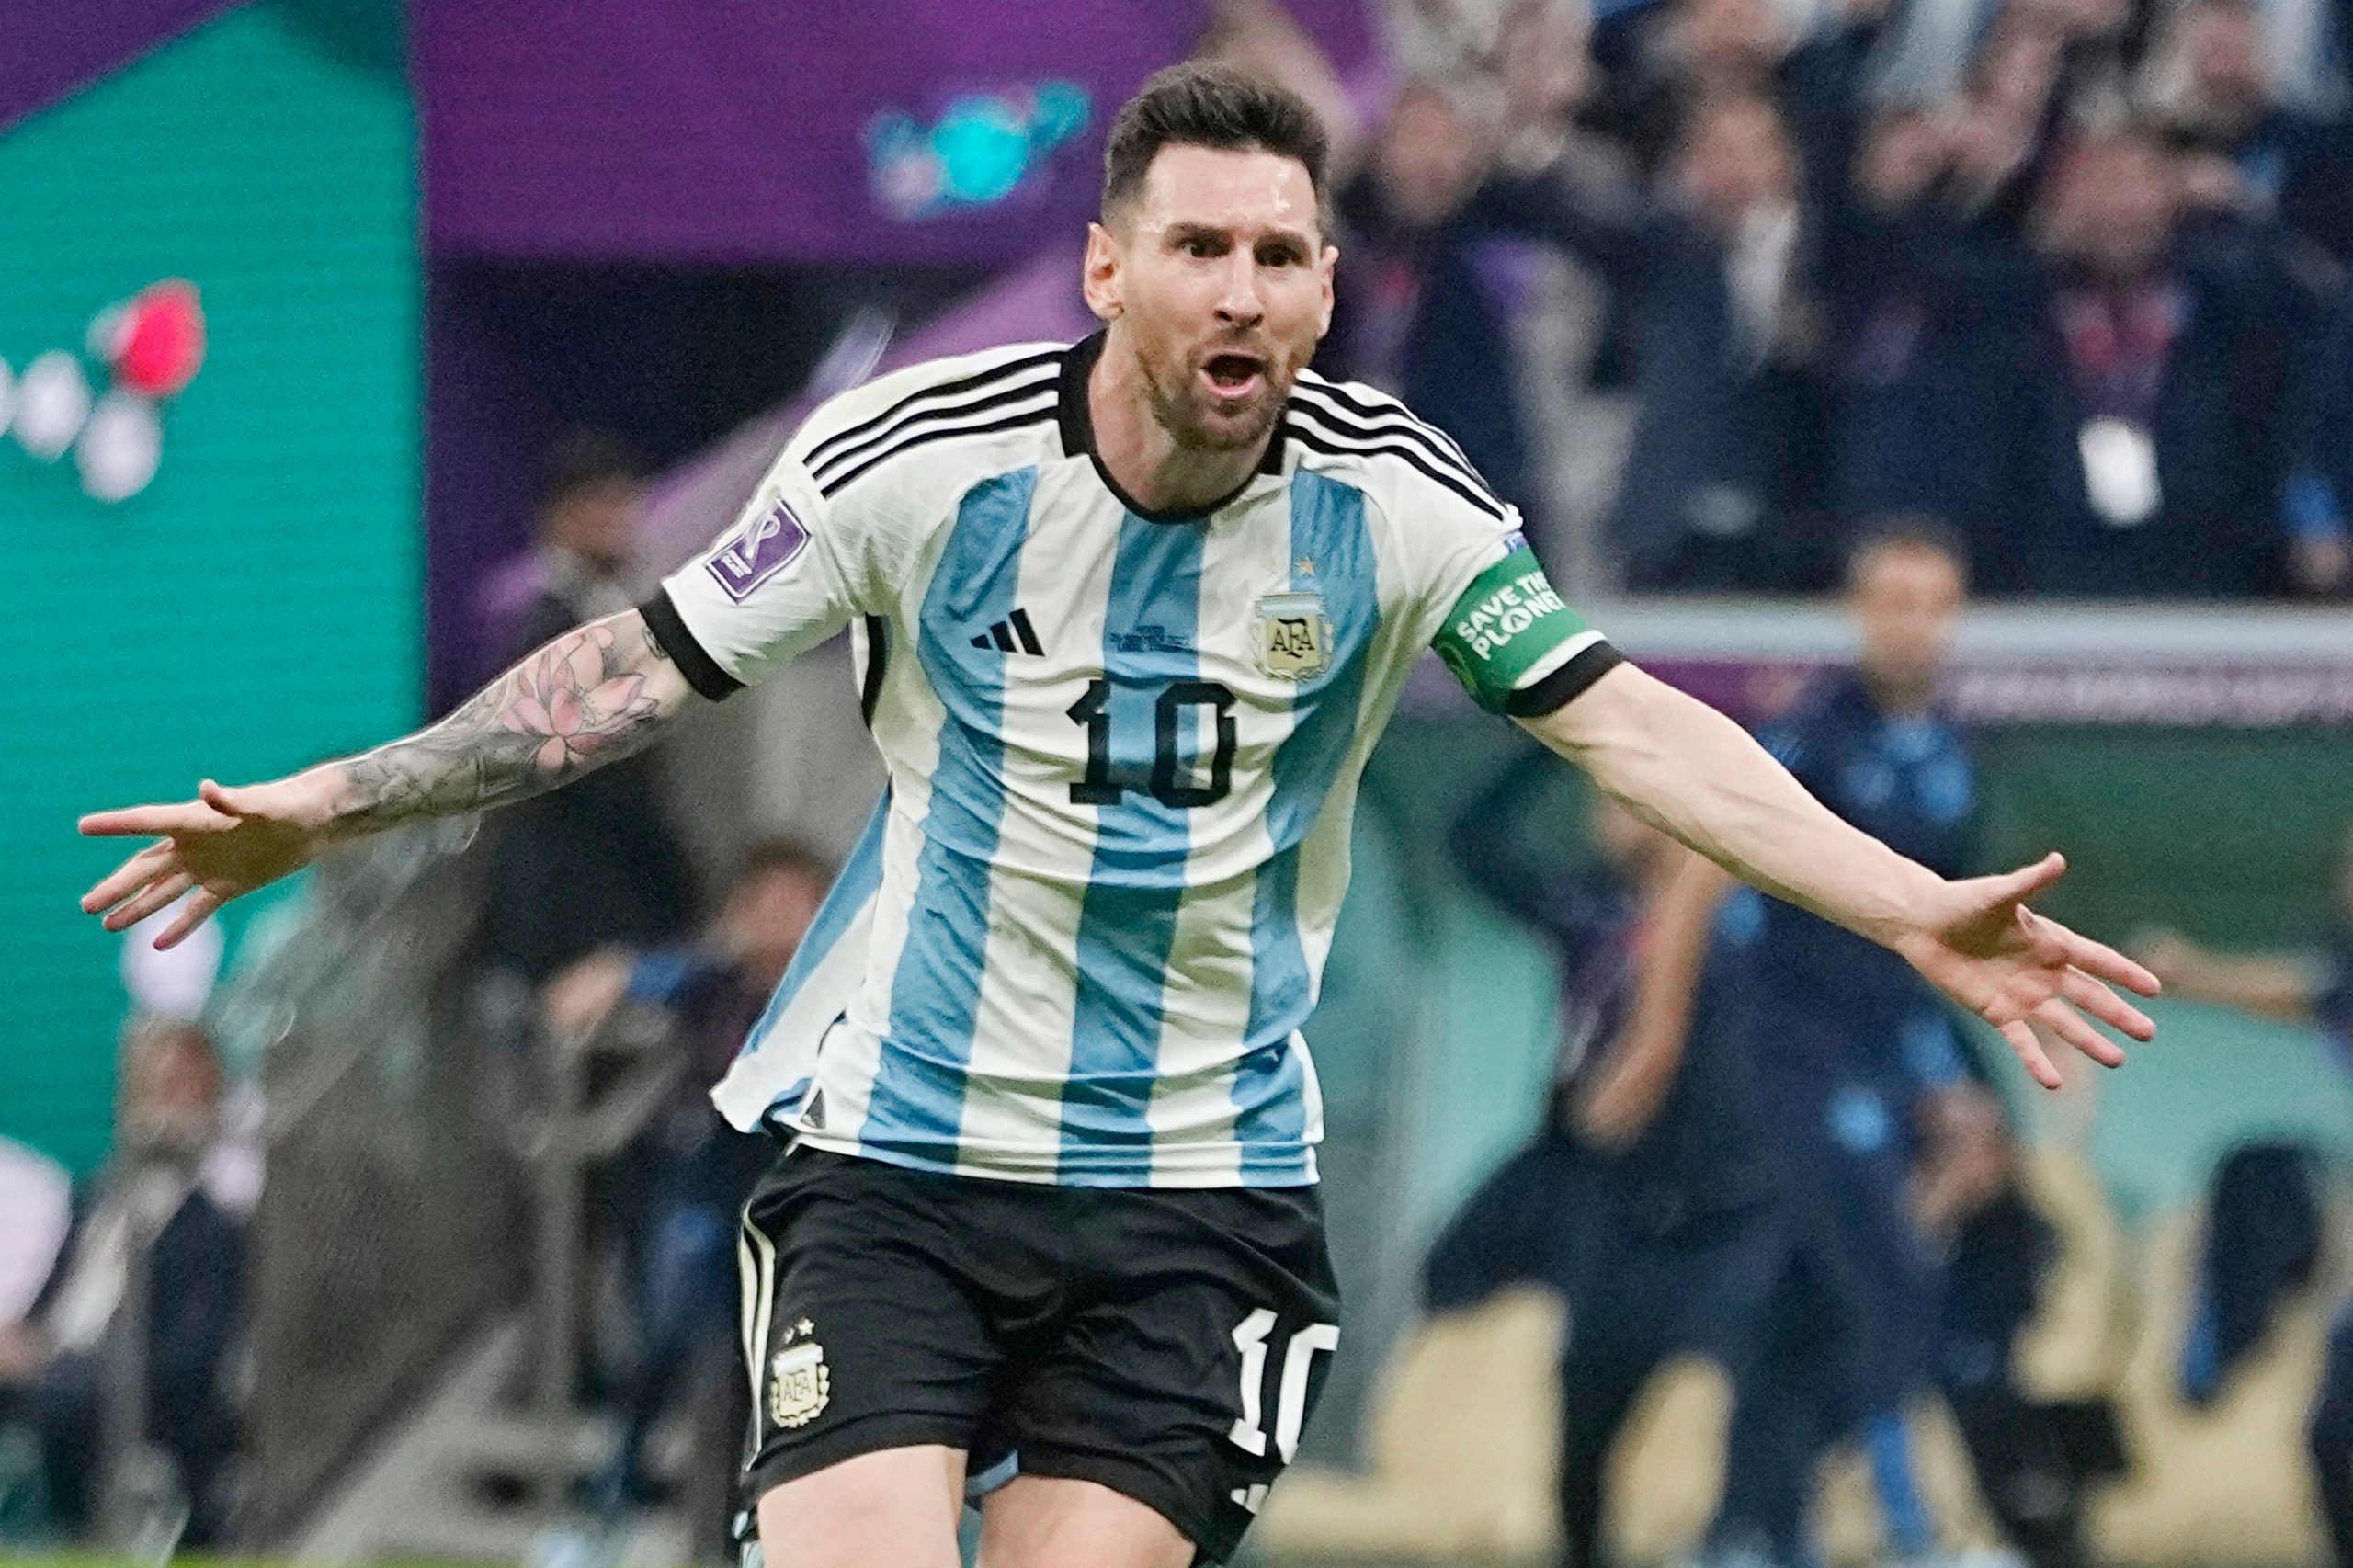 Should Lionel Messi continue to take penalties? Argentina star’s record